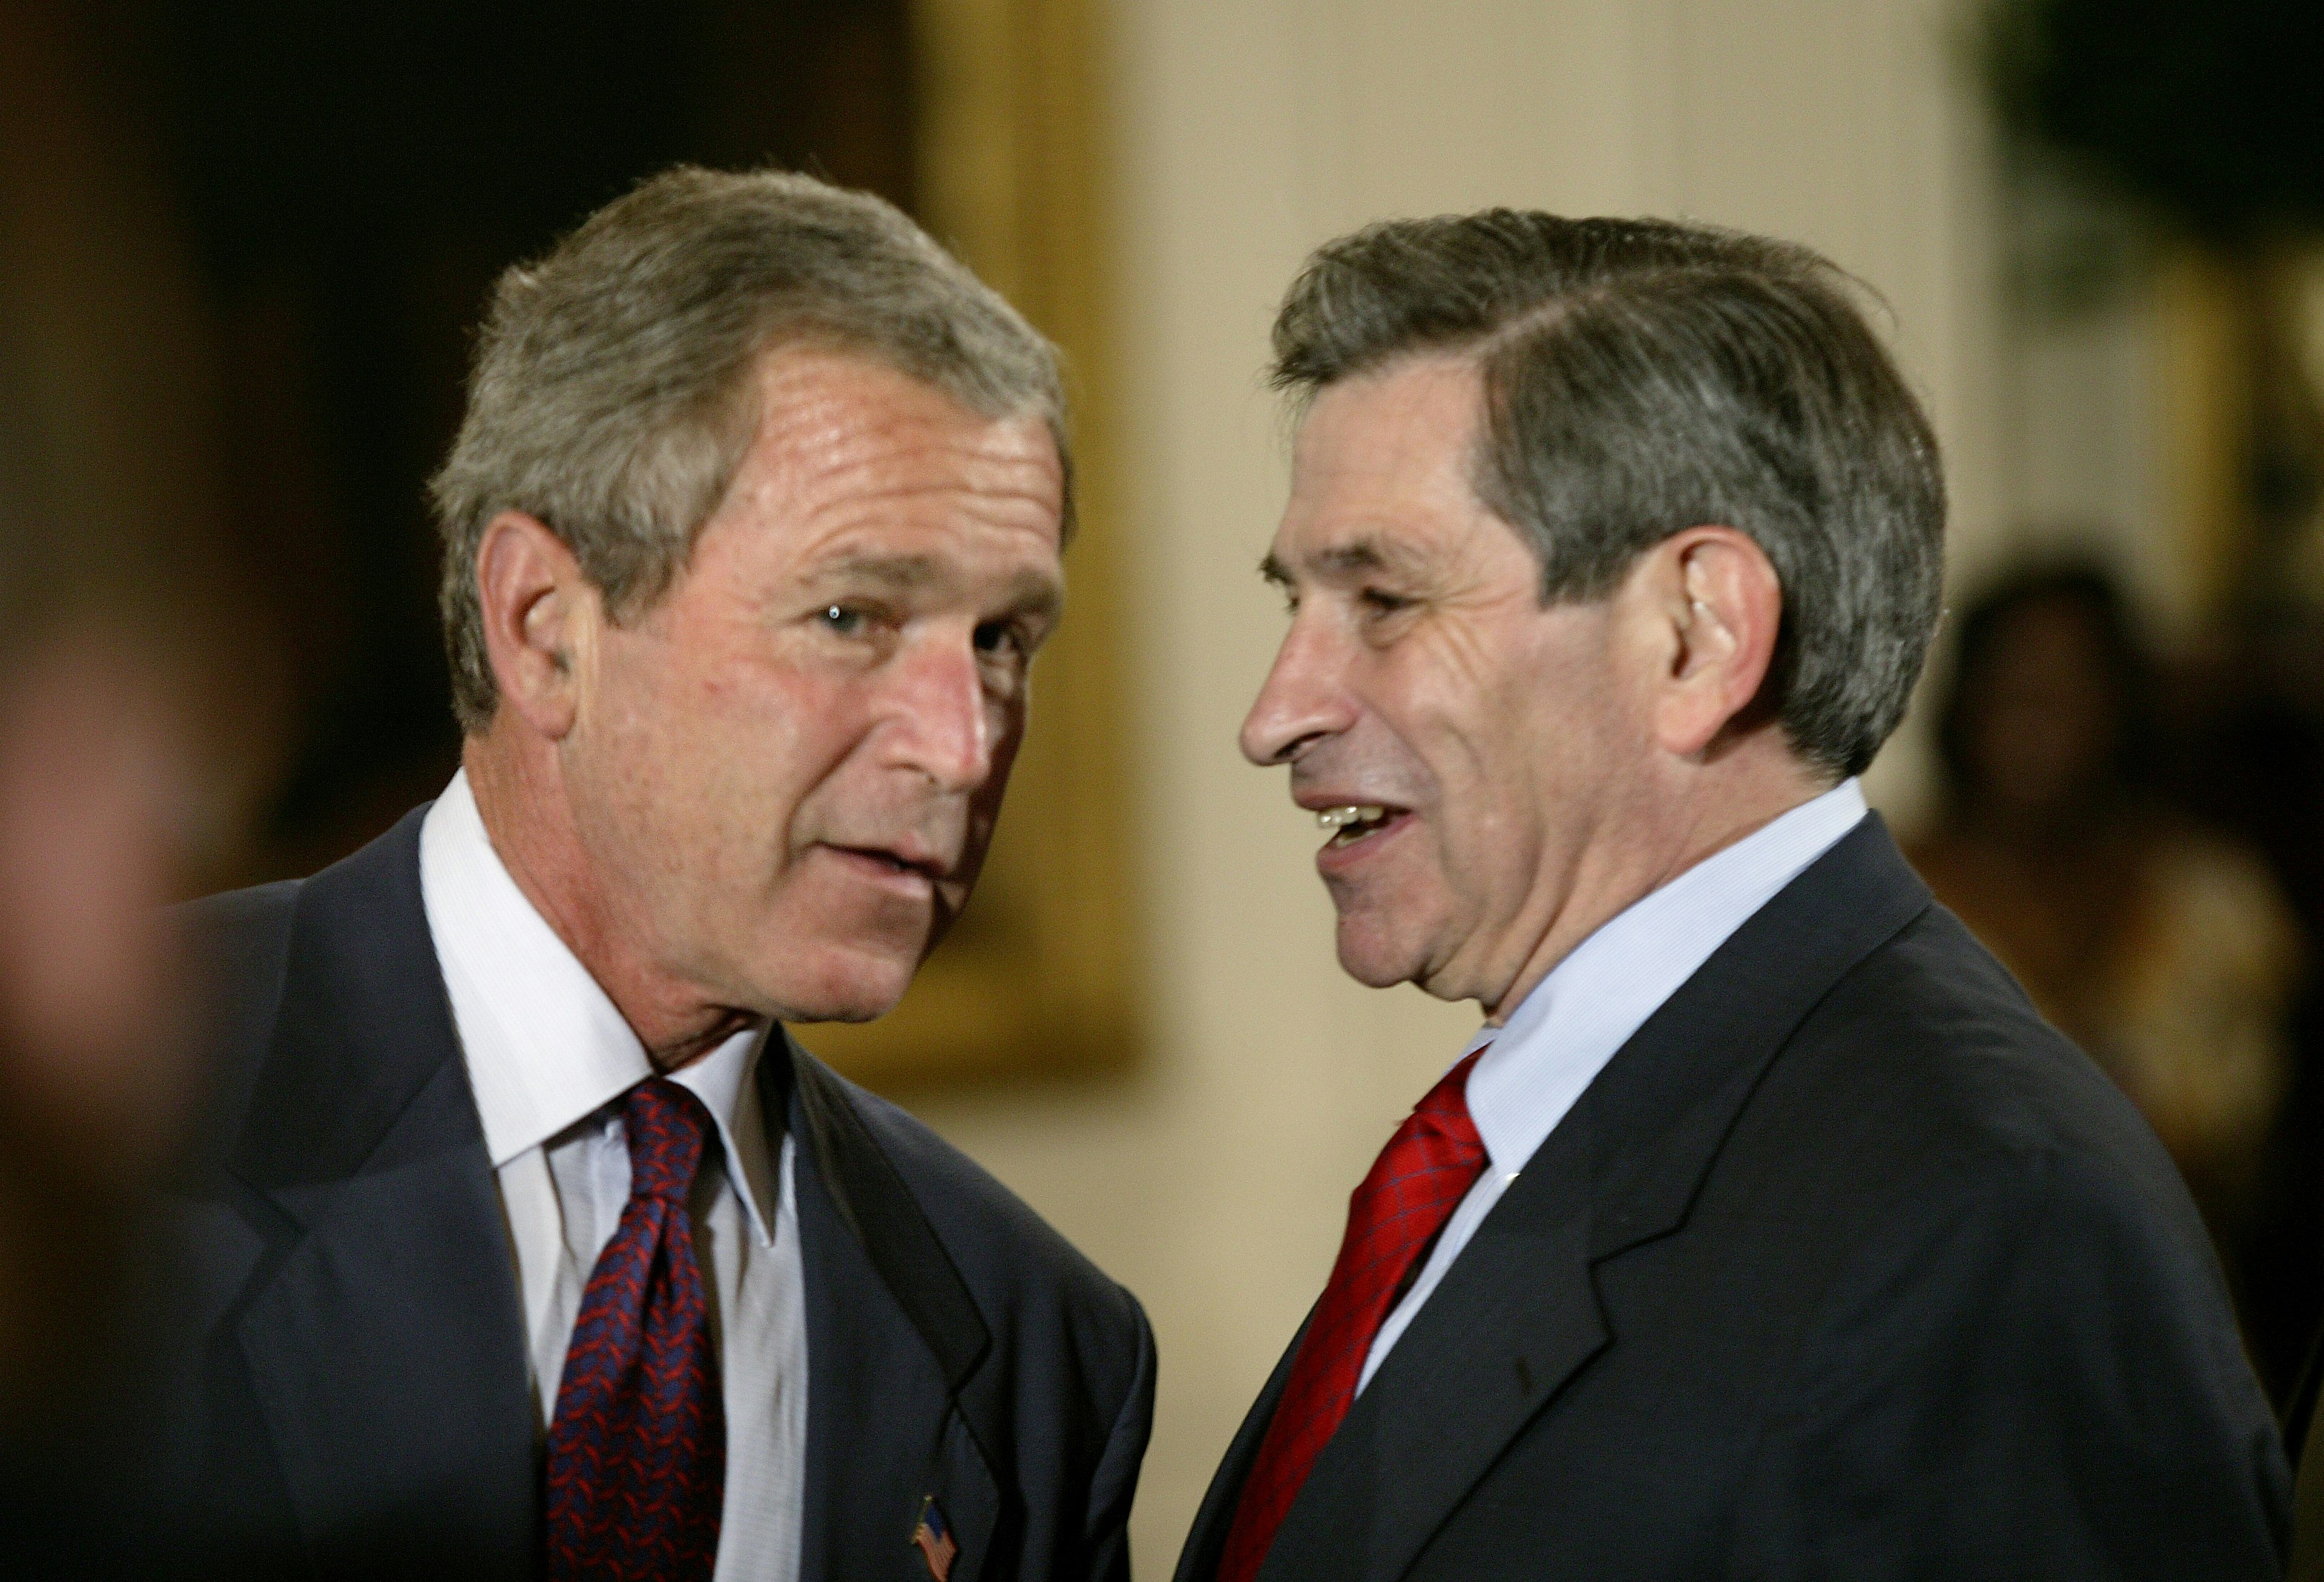 United States President George W. Bush talks to Deputy Secretary of Defense Paul Wolfowitz after thanking American servicemen and women for re-enlisting in the armed forces at a ceremony in the East Room of the White House. As a new poll showed American confidence slipping over the U.S.-role in post-war Iraq, Bush vowed to defeat those attacking coalition forces. (Photo by Brooks Kraft LLC/Corbis via Getty Images)